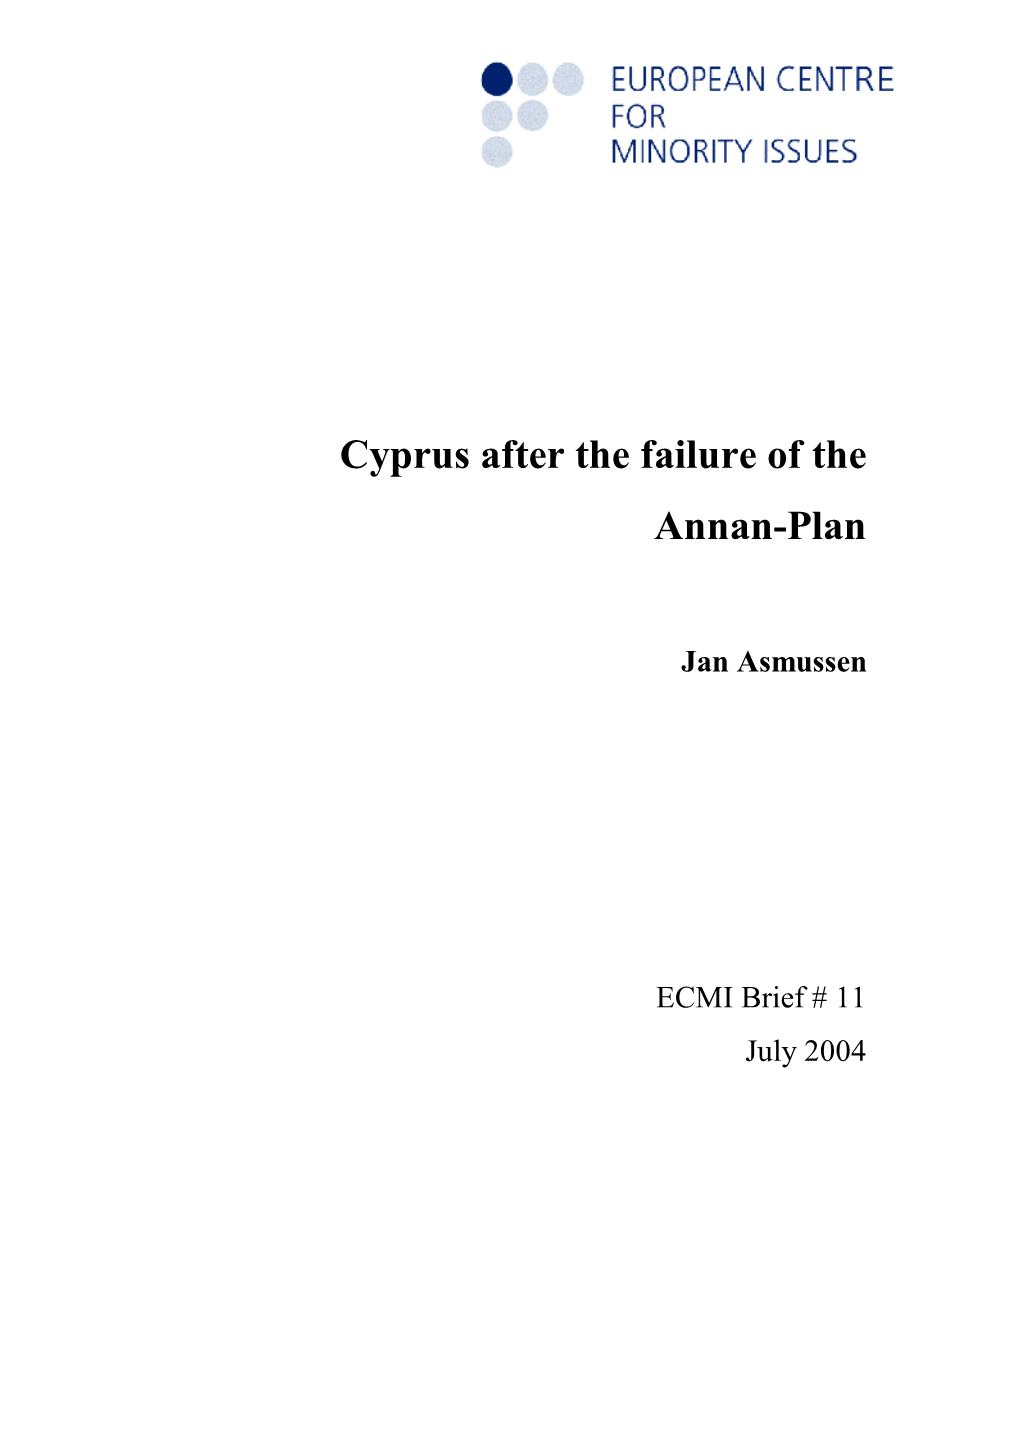 Cyprus After the Failure of the Annan-Plan